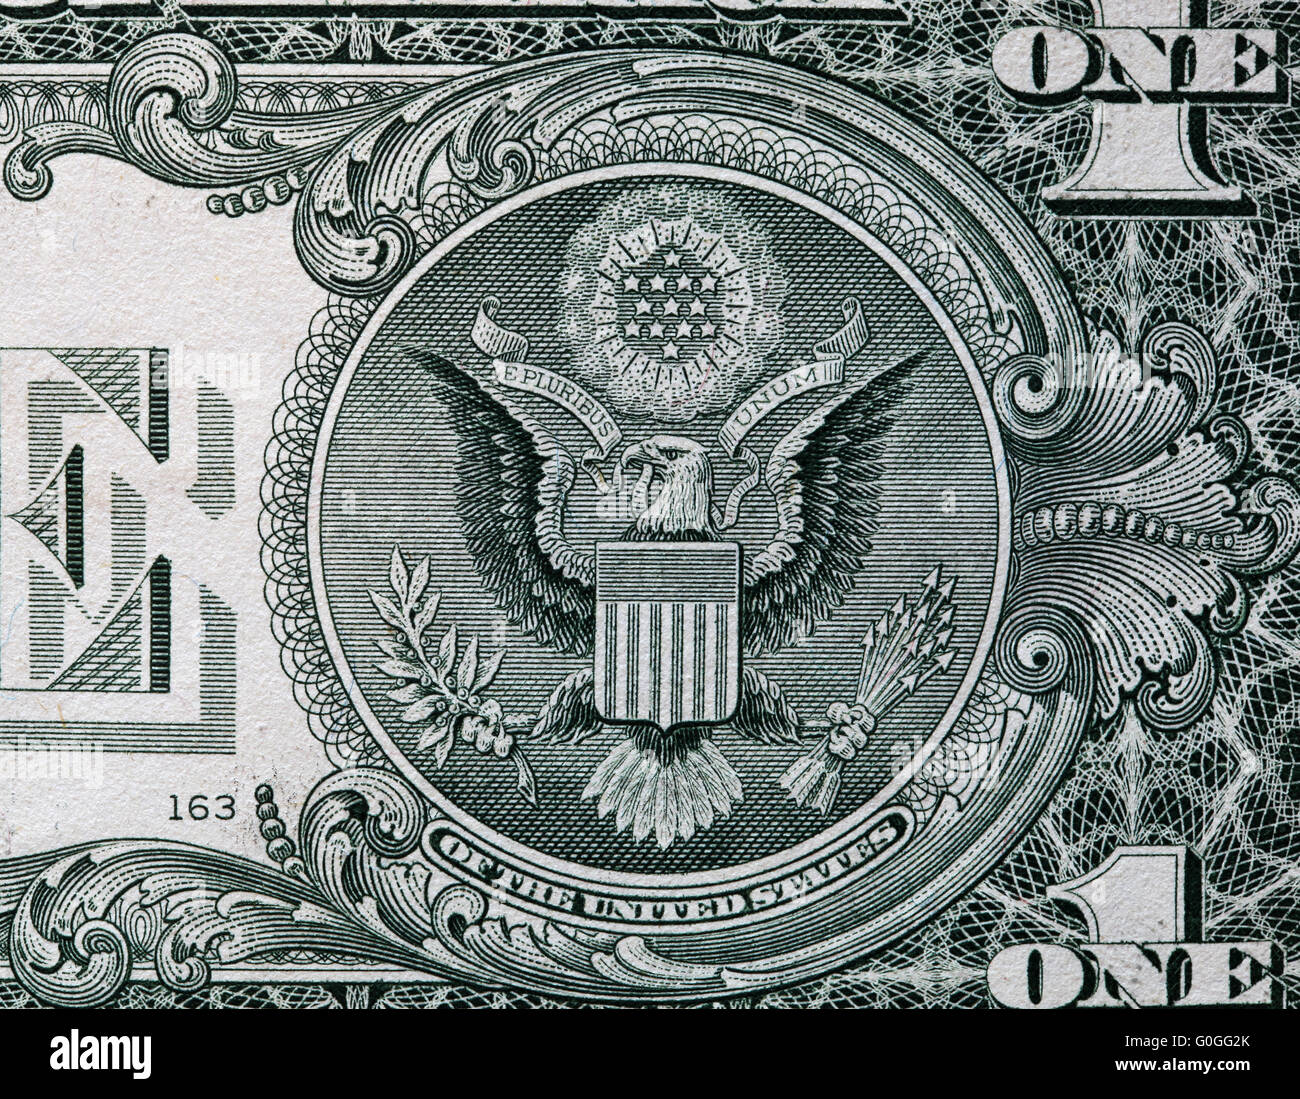 The Seal of The United States with E Pluribus Unum motto on the reverse side of one American dollar bill. USD Stock Photo